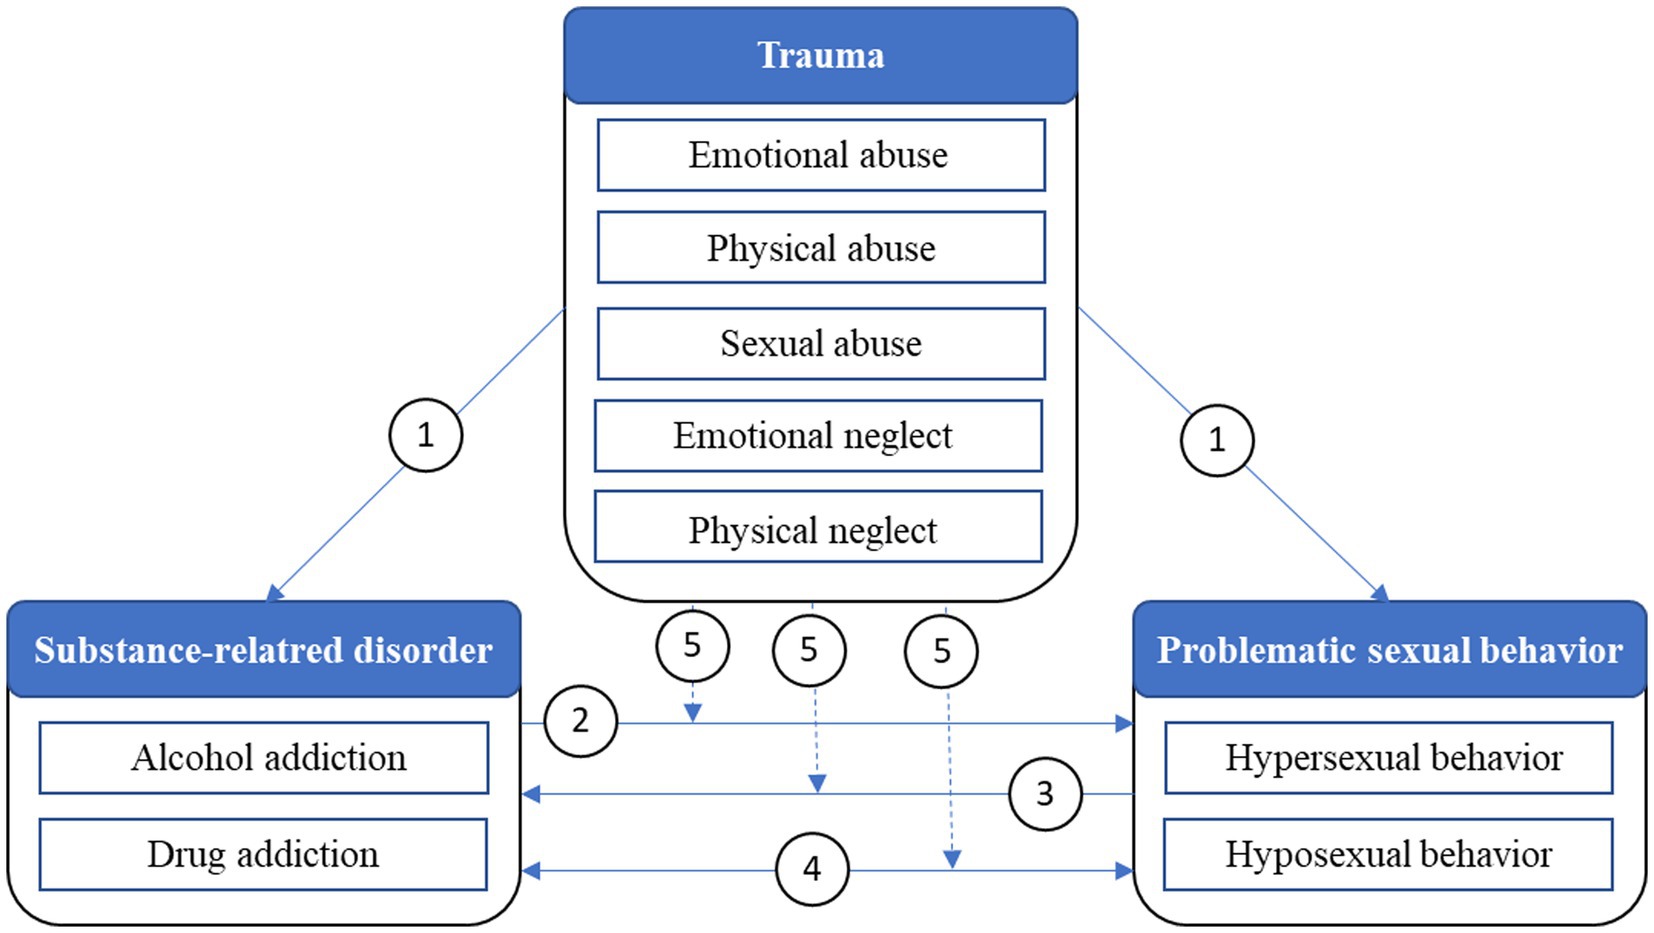 Frontiers Study protocol Hypersexual and hyposexual behavior among adults diagnosed with alcohol- and substance use disorders—Associations between traumatic experiences and problematic sexual behavior image